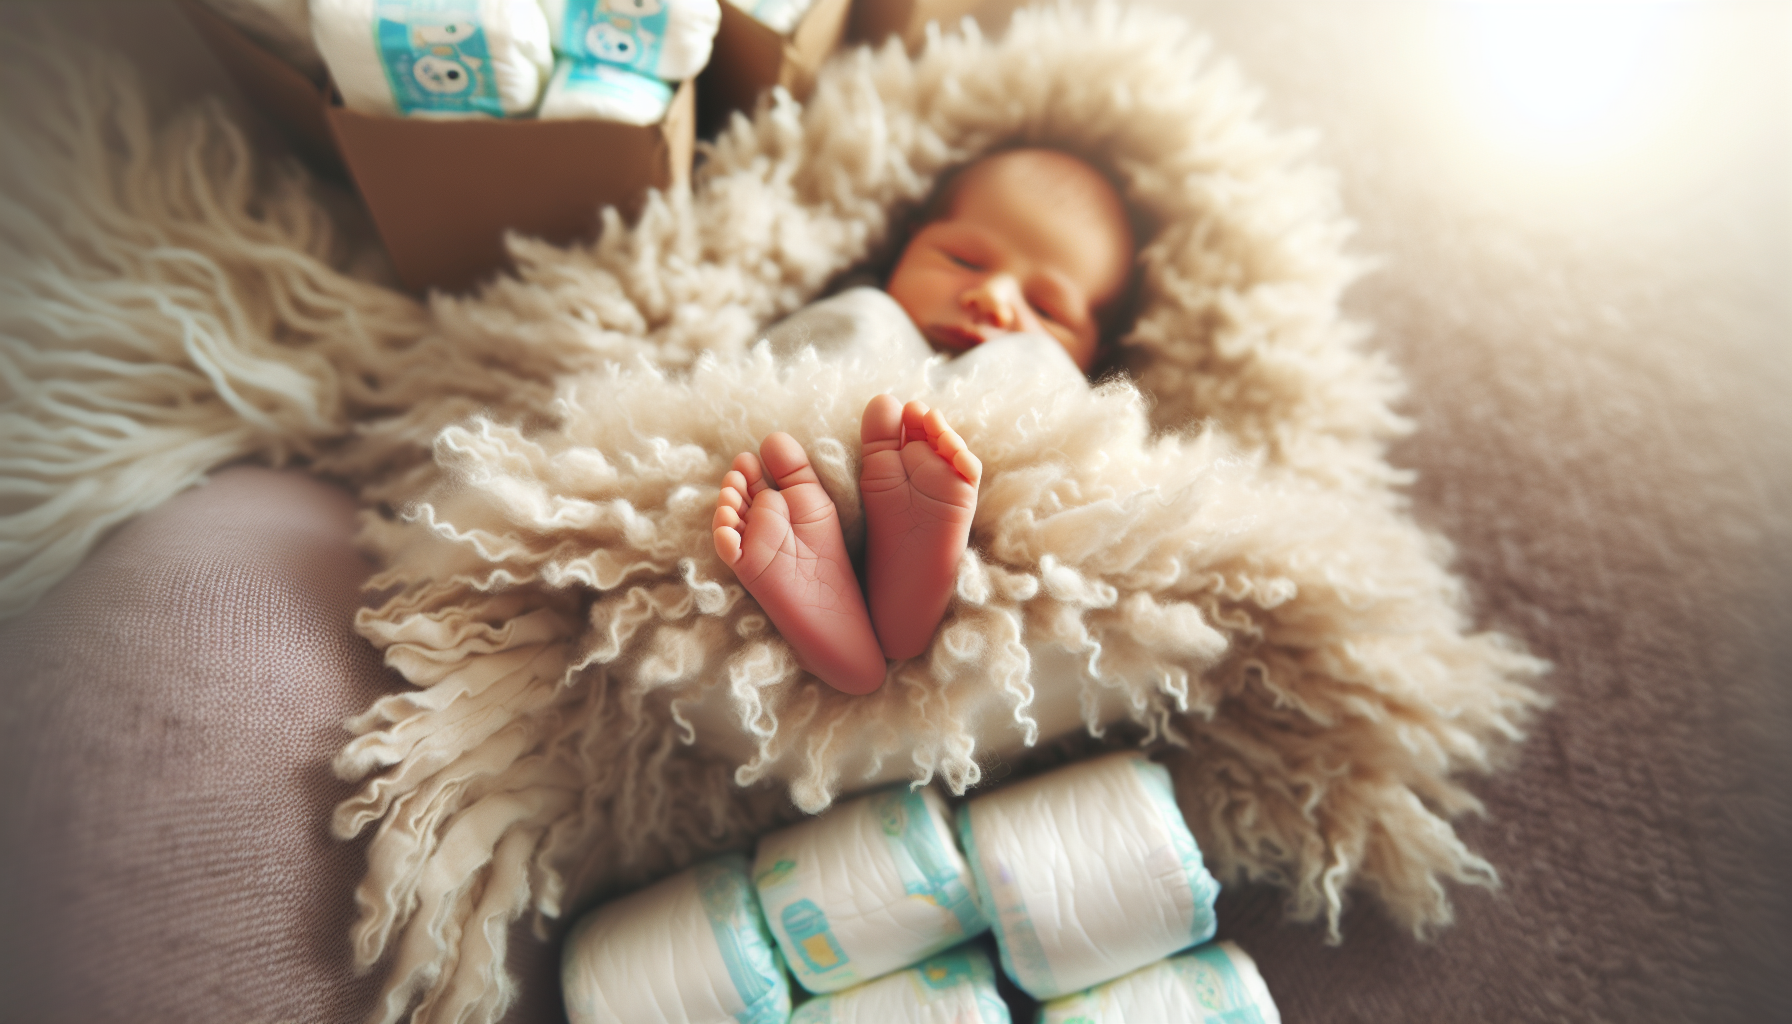 New Born: Thriving in the World of Diapers and Discounts